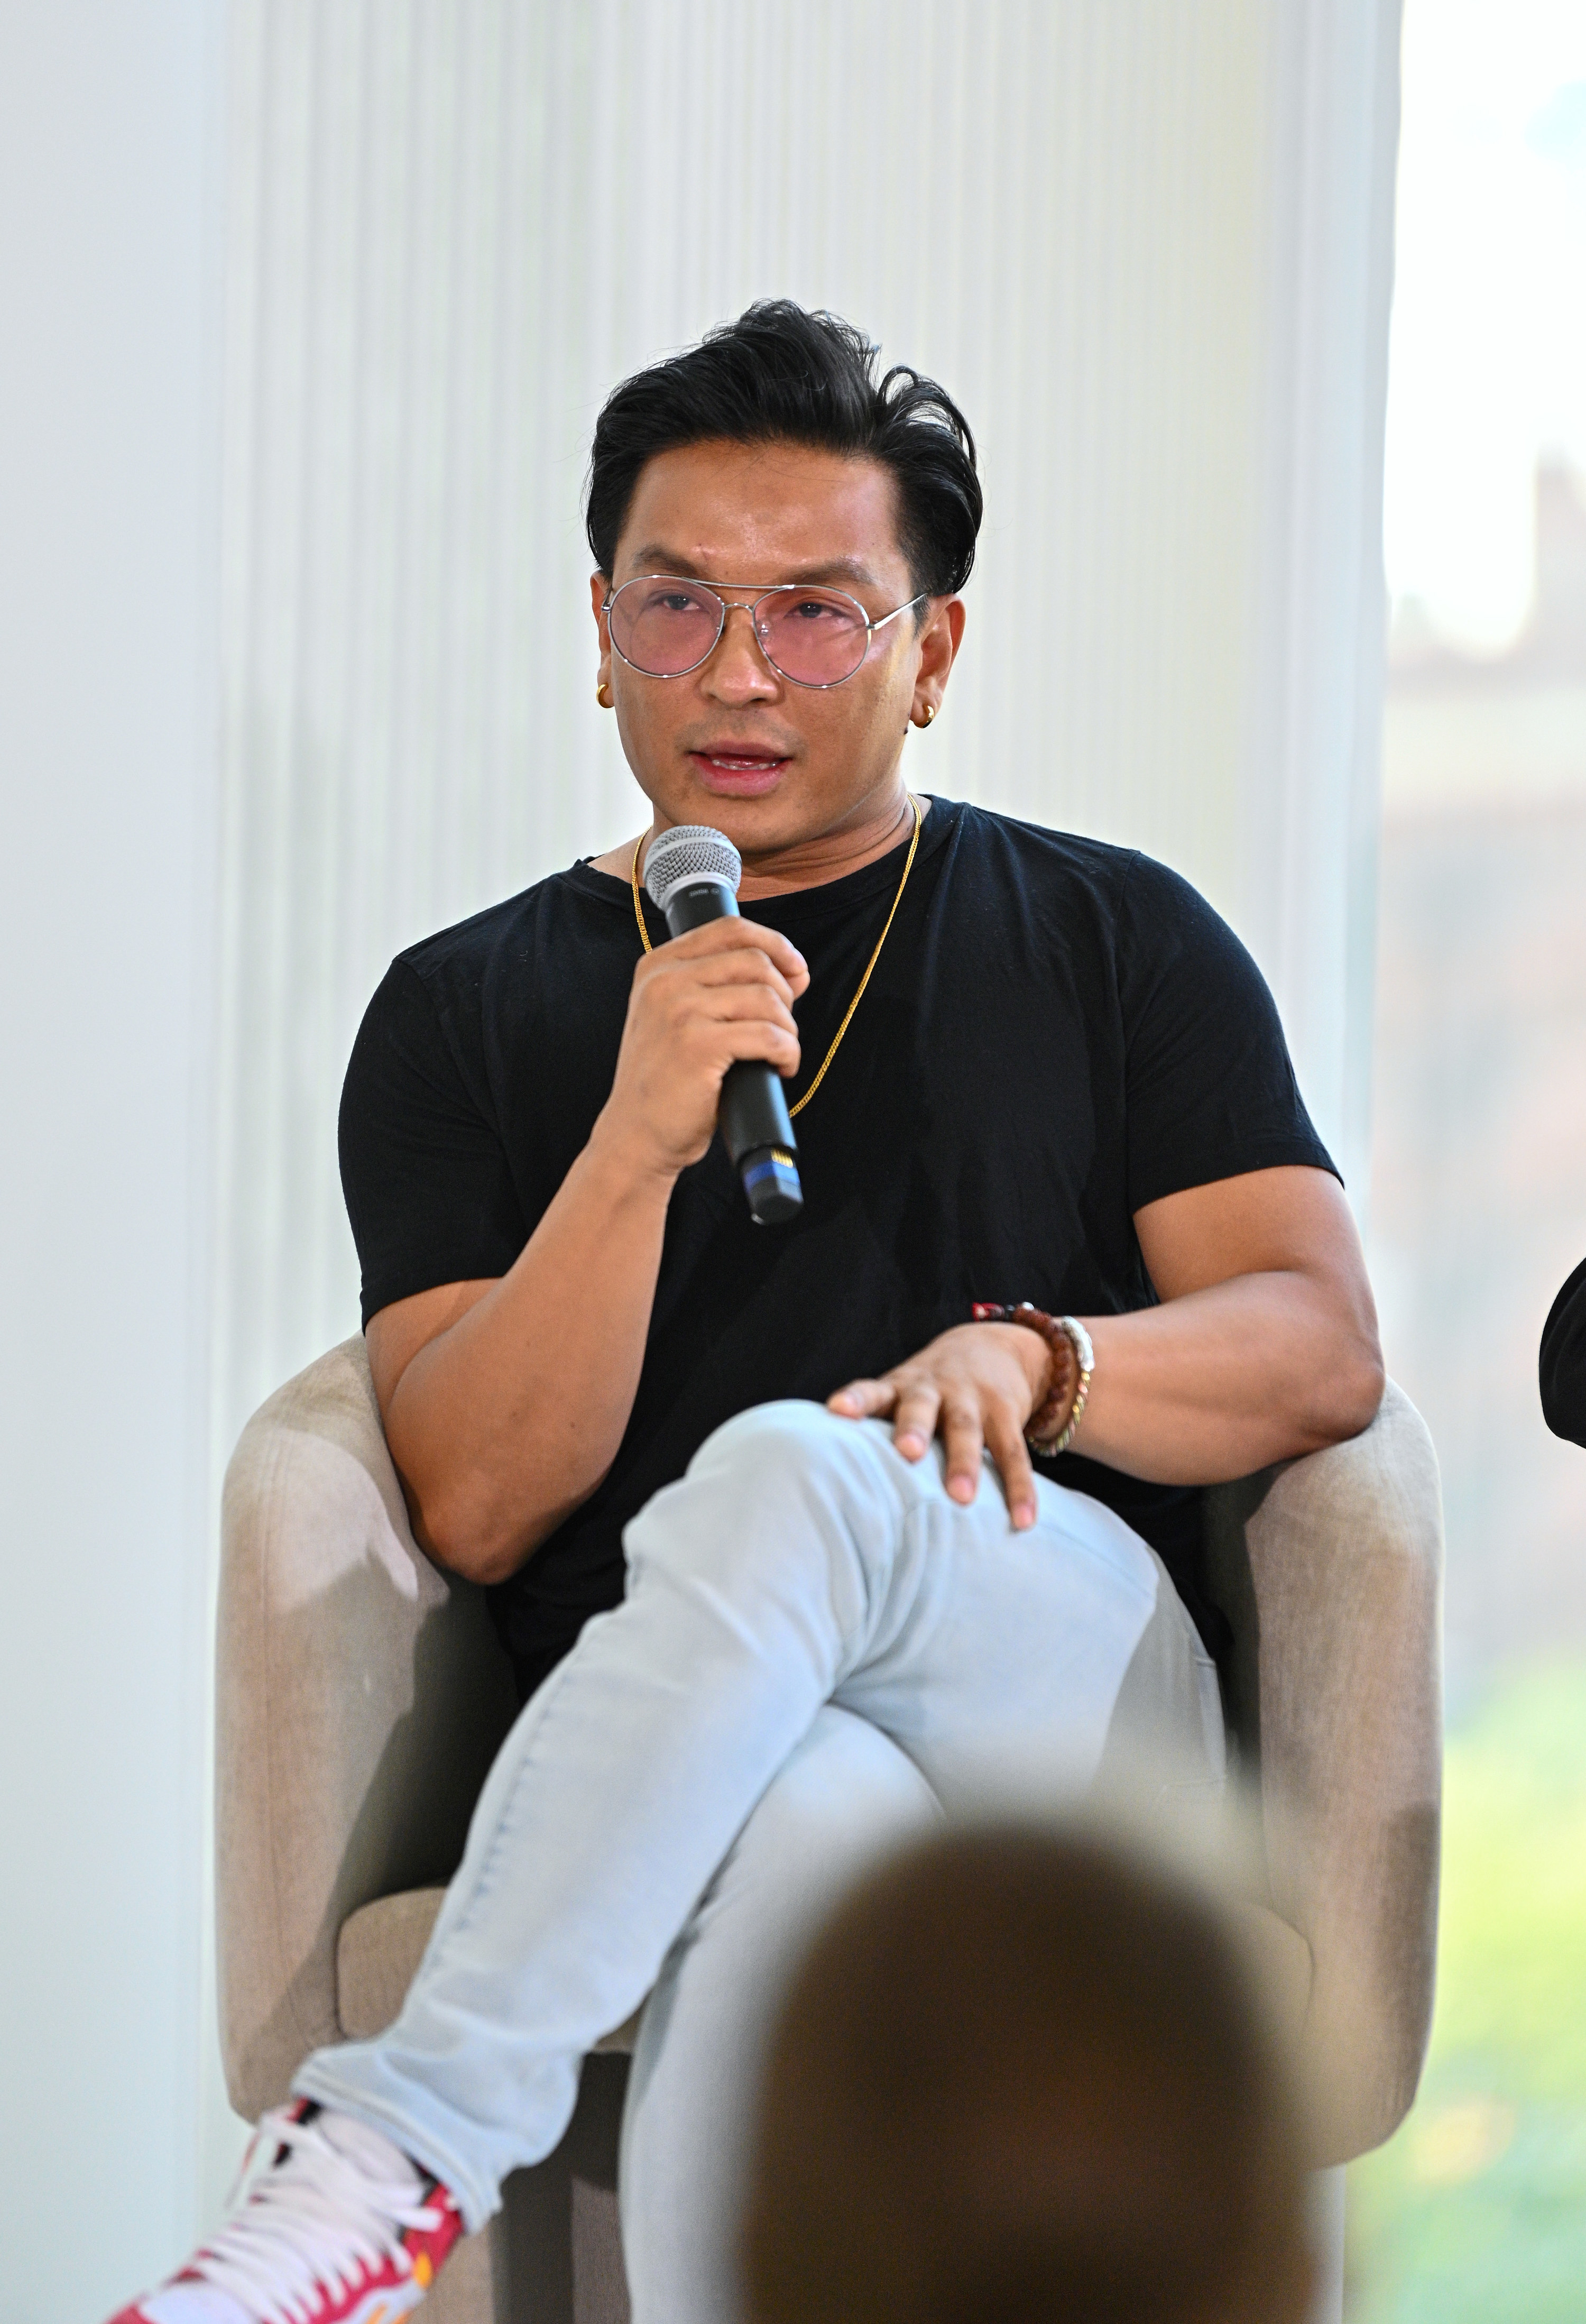 Prabal Gurung speaks at My American Dream: Understanding The Fashion World Through The Immigrant Experience during NYFW